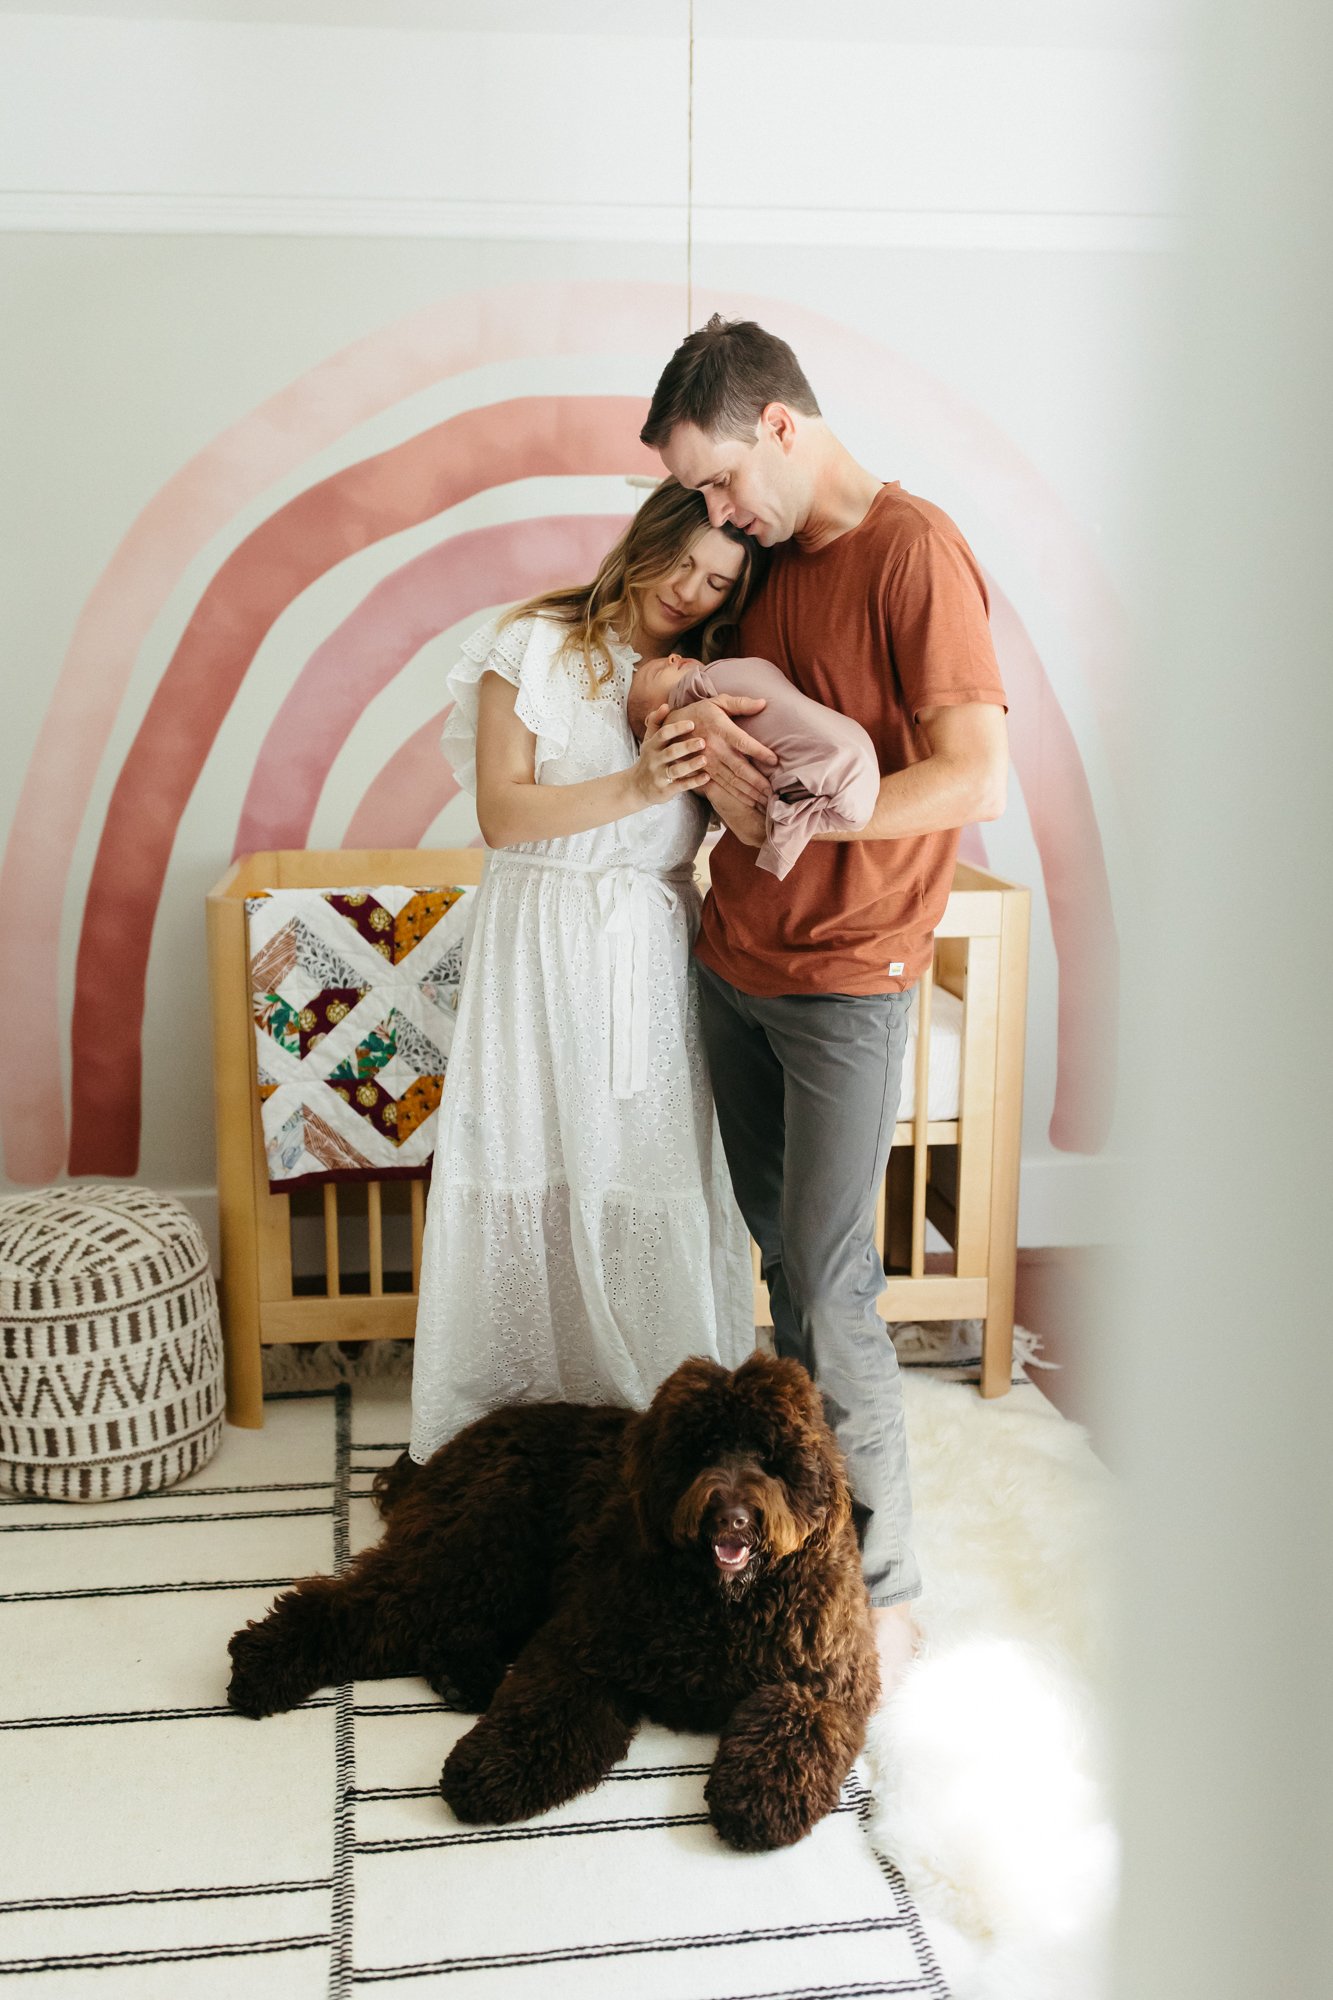 in-home family outfit photo ideas from san francisco family photographer and marin family photographer Cristin More_1.jpg